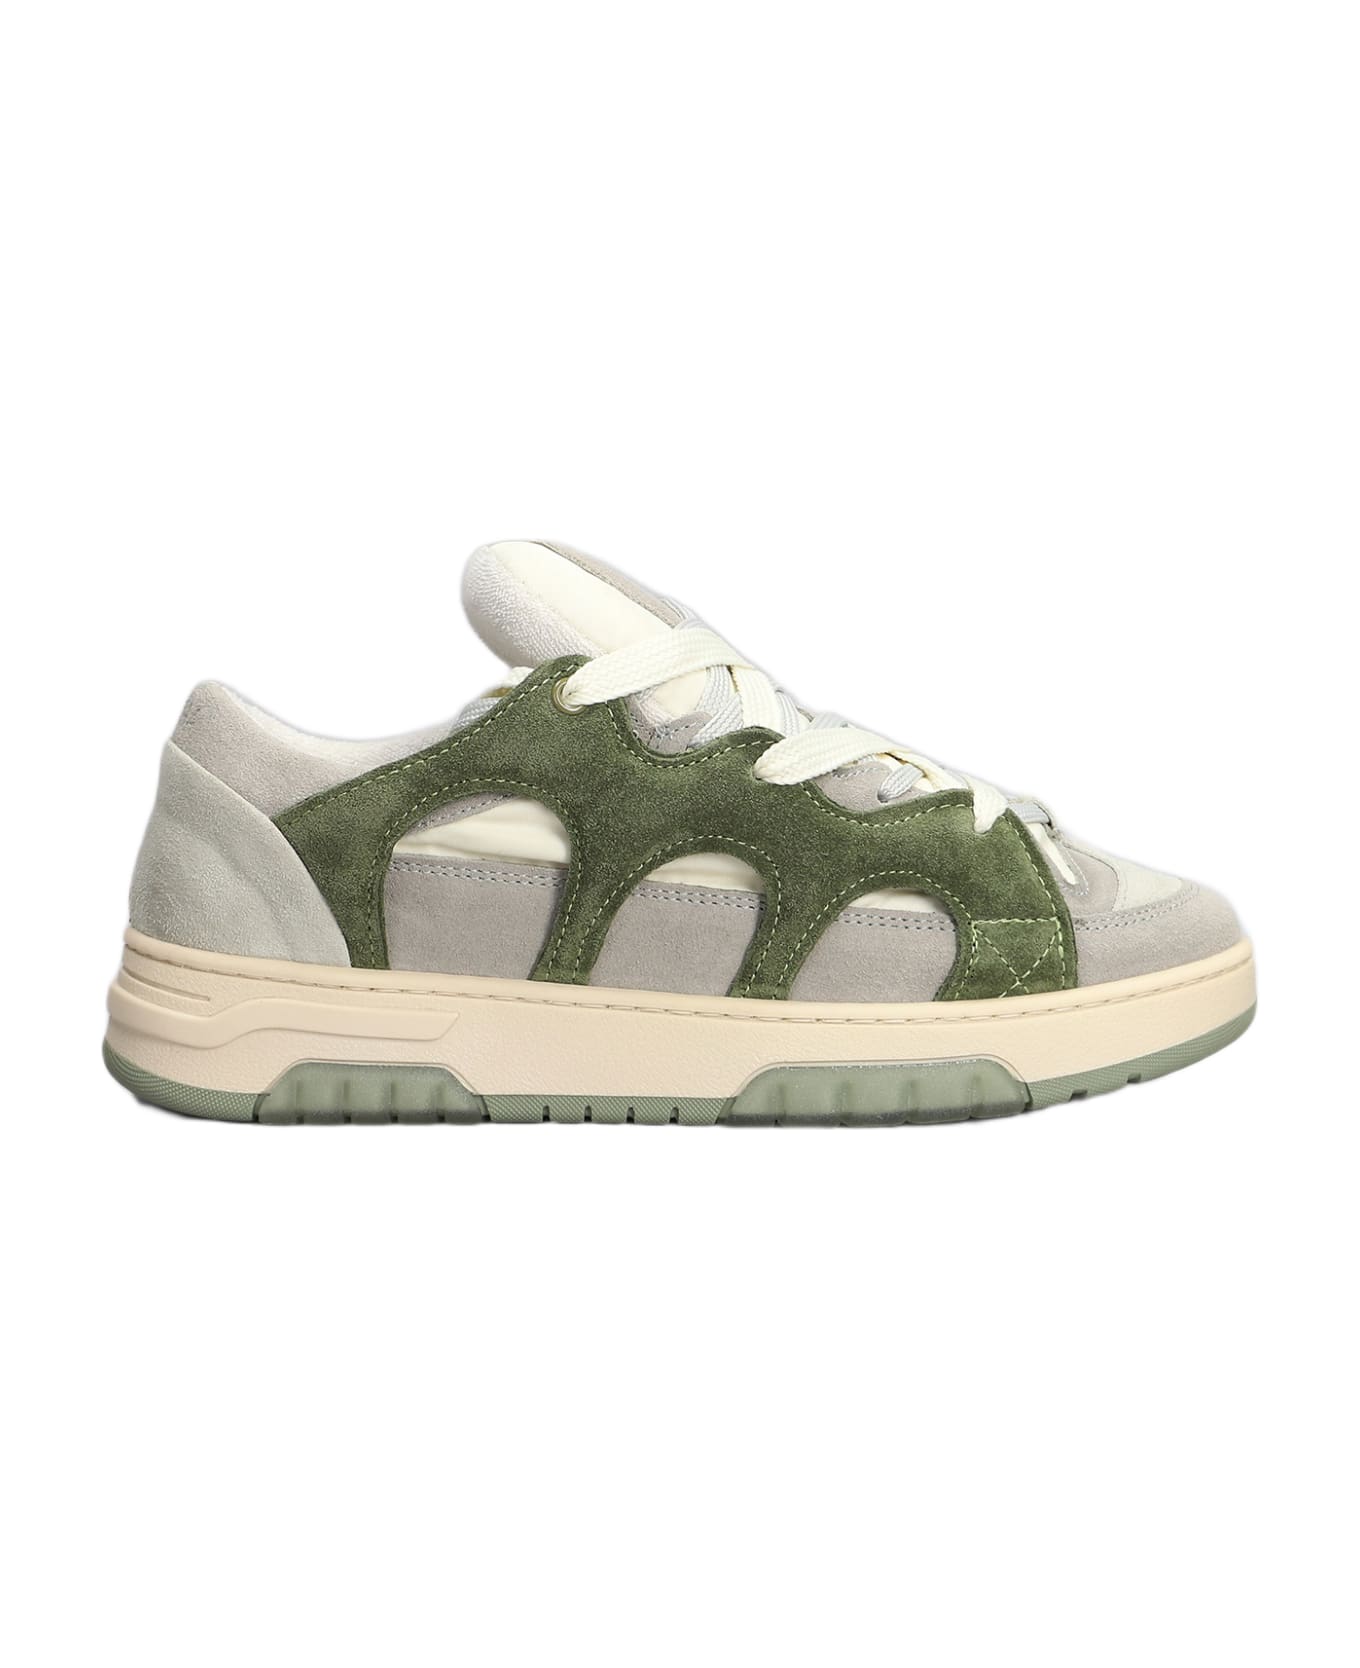 Paura Santha 1 Sneakers In Green Suede And Fabric - green スニーカー